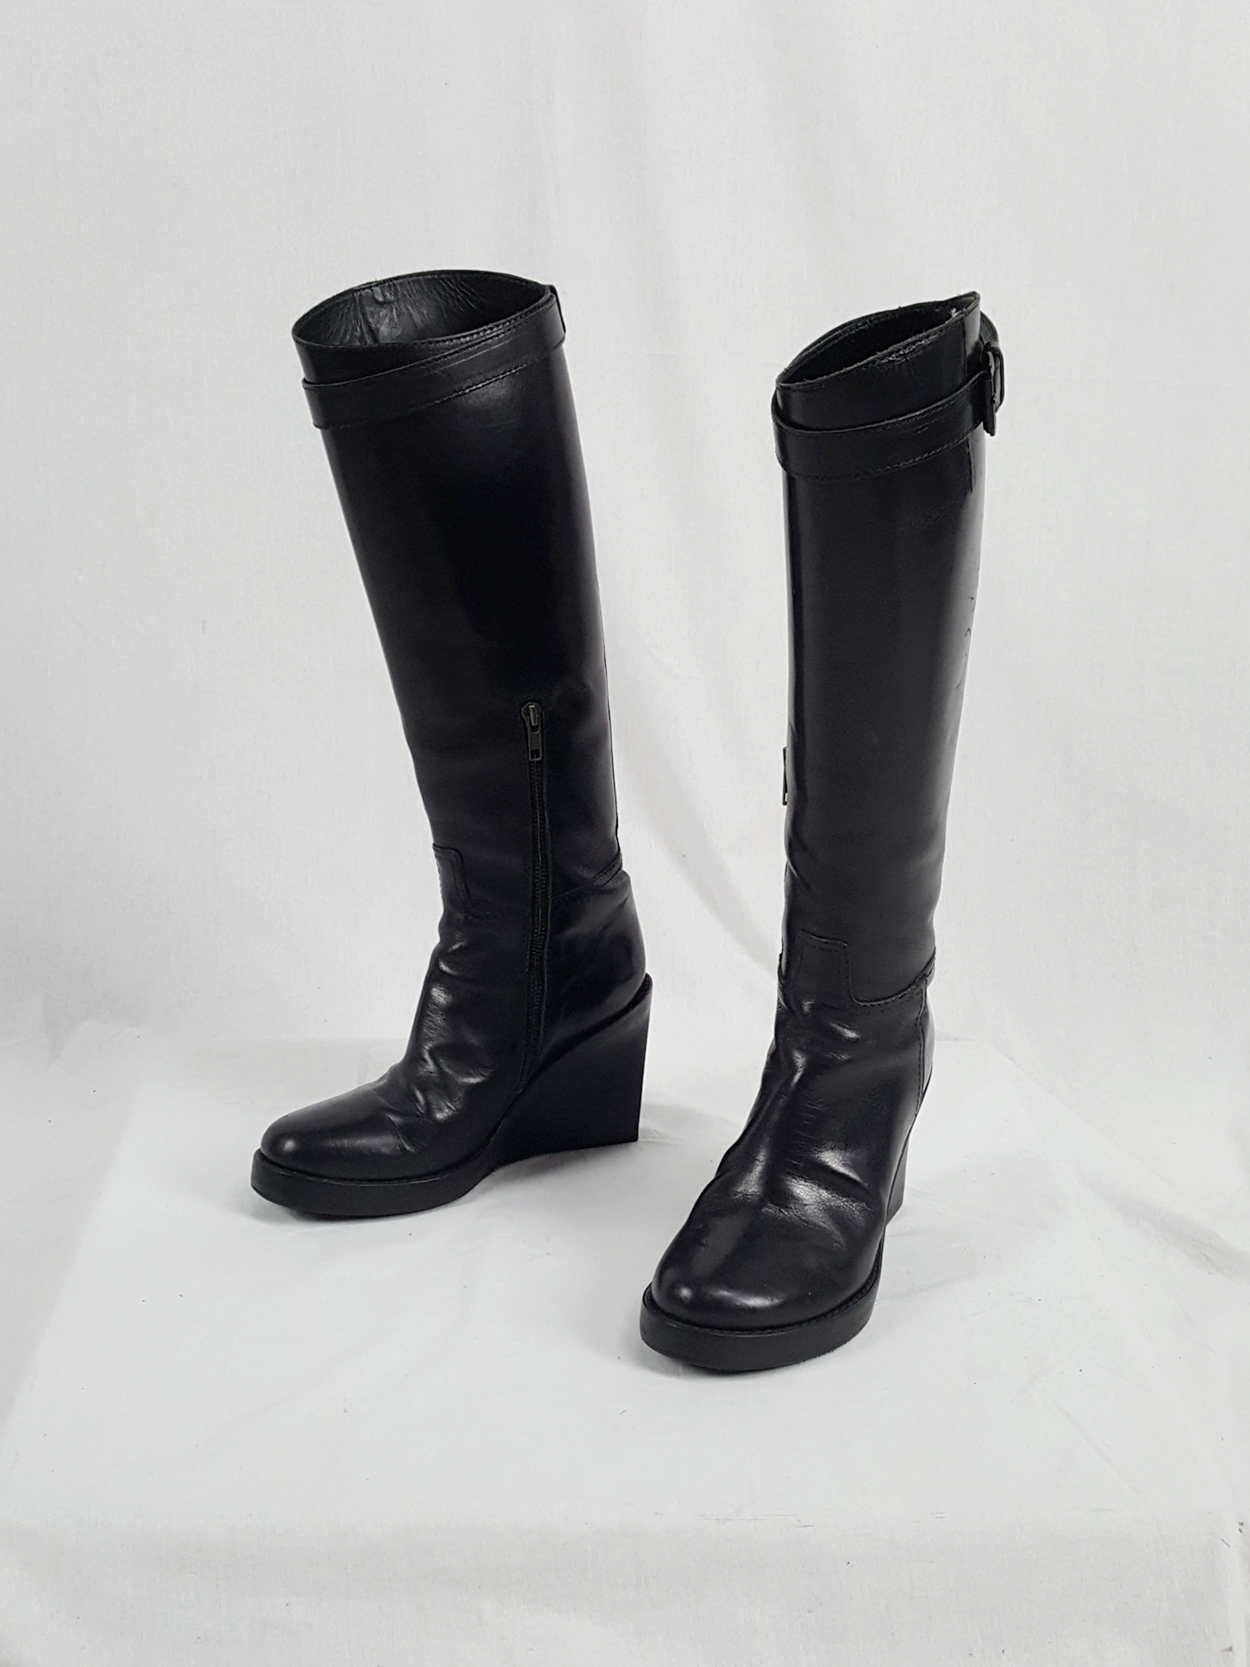 Ann Demeulemeester tall black wedge boots with belt strap detail (38 ...